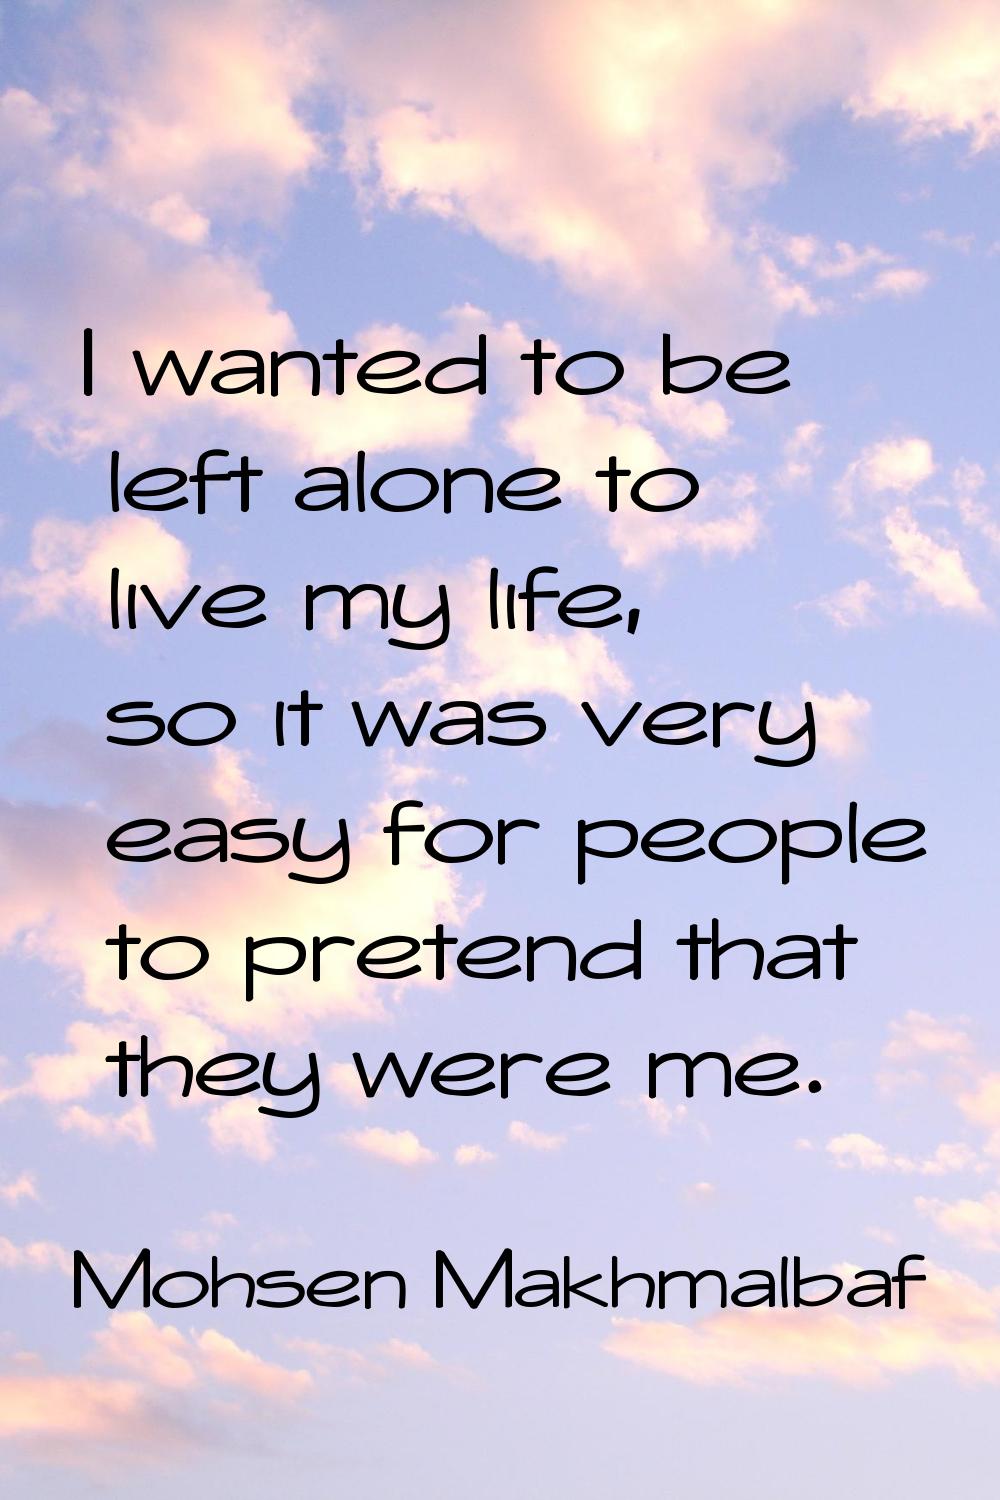 I wanted to be left alone to live my life, so it was very easy for people to pretend that they were